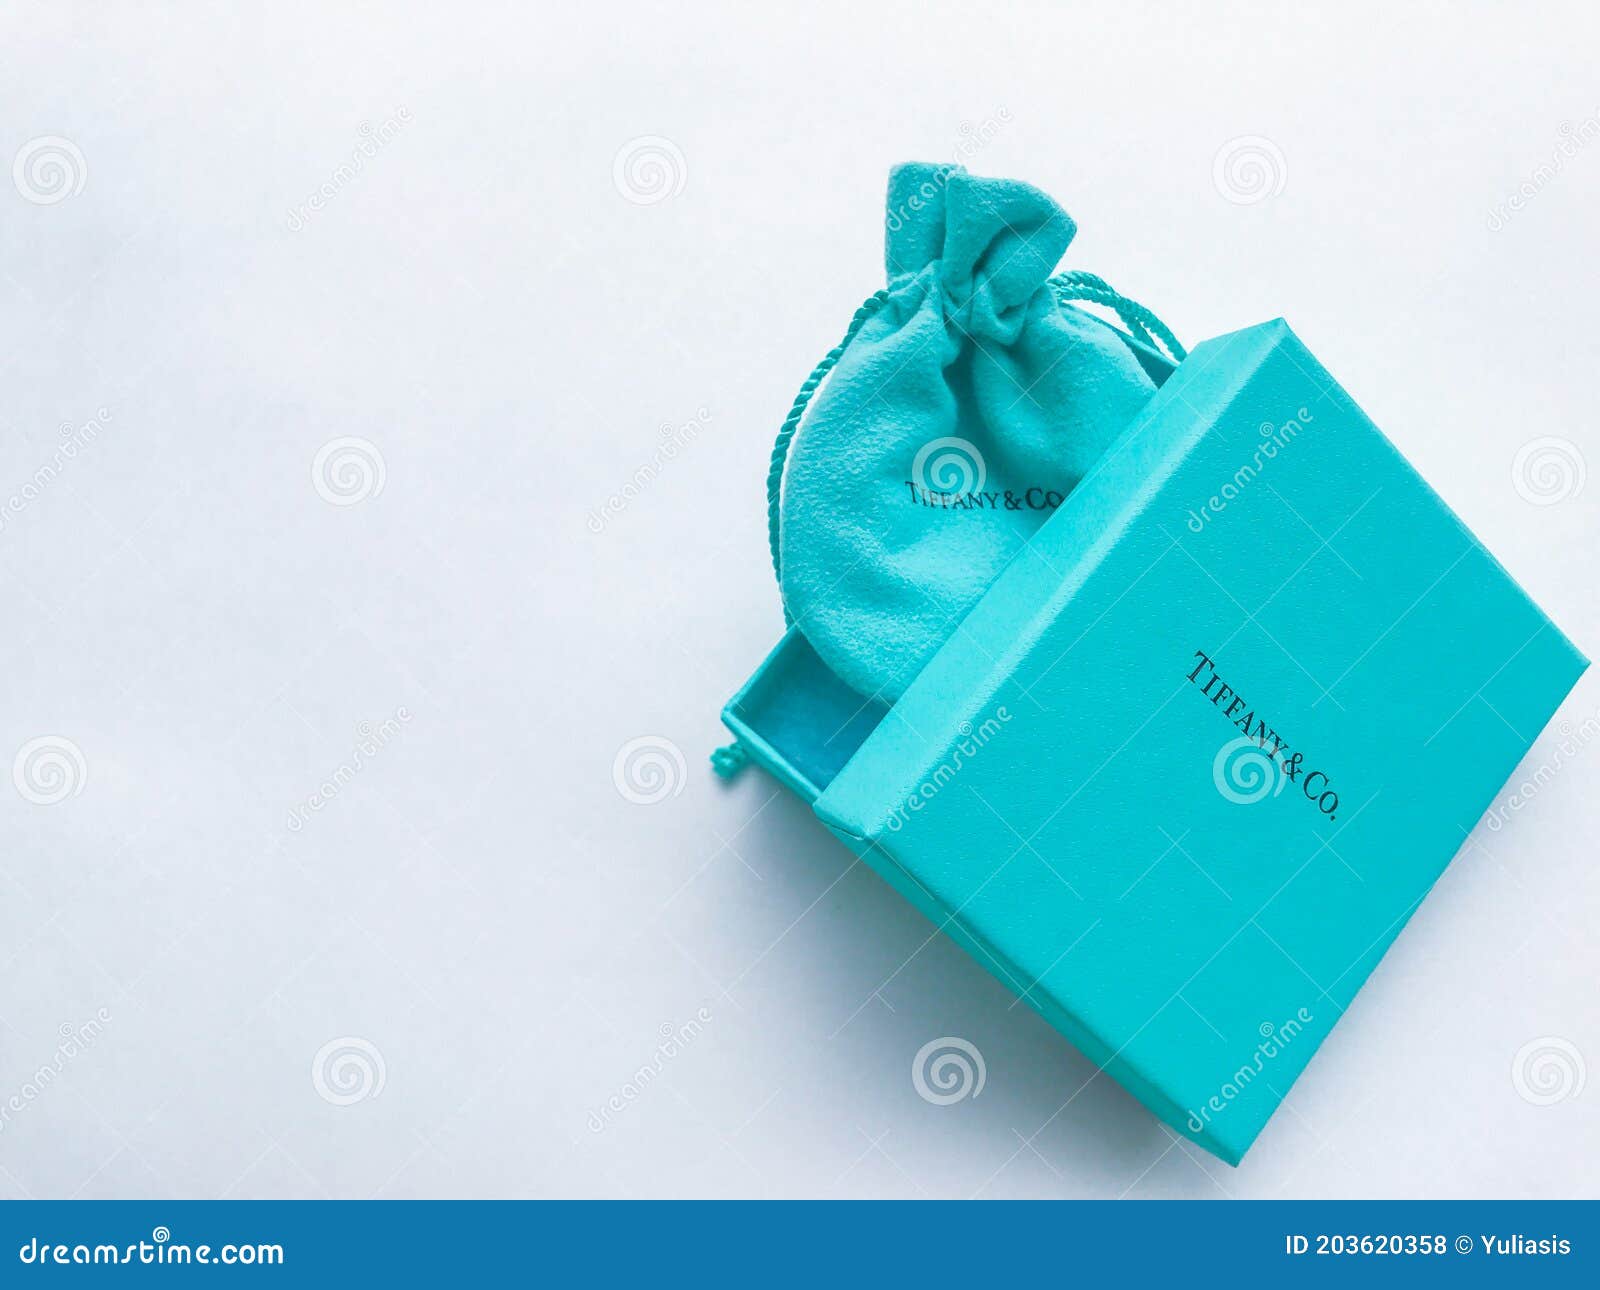 Moscow, Russia, August 2019: Signature Tiffany and Co. a Bag and Box  Branded Packaging Jewelry Brand Tiffany and Co Editorial Stock Photo -  Image of jewelry, packaging: 203620358